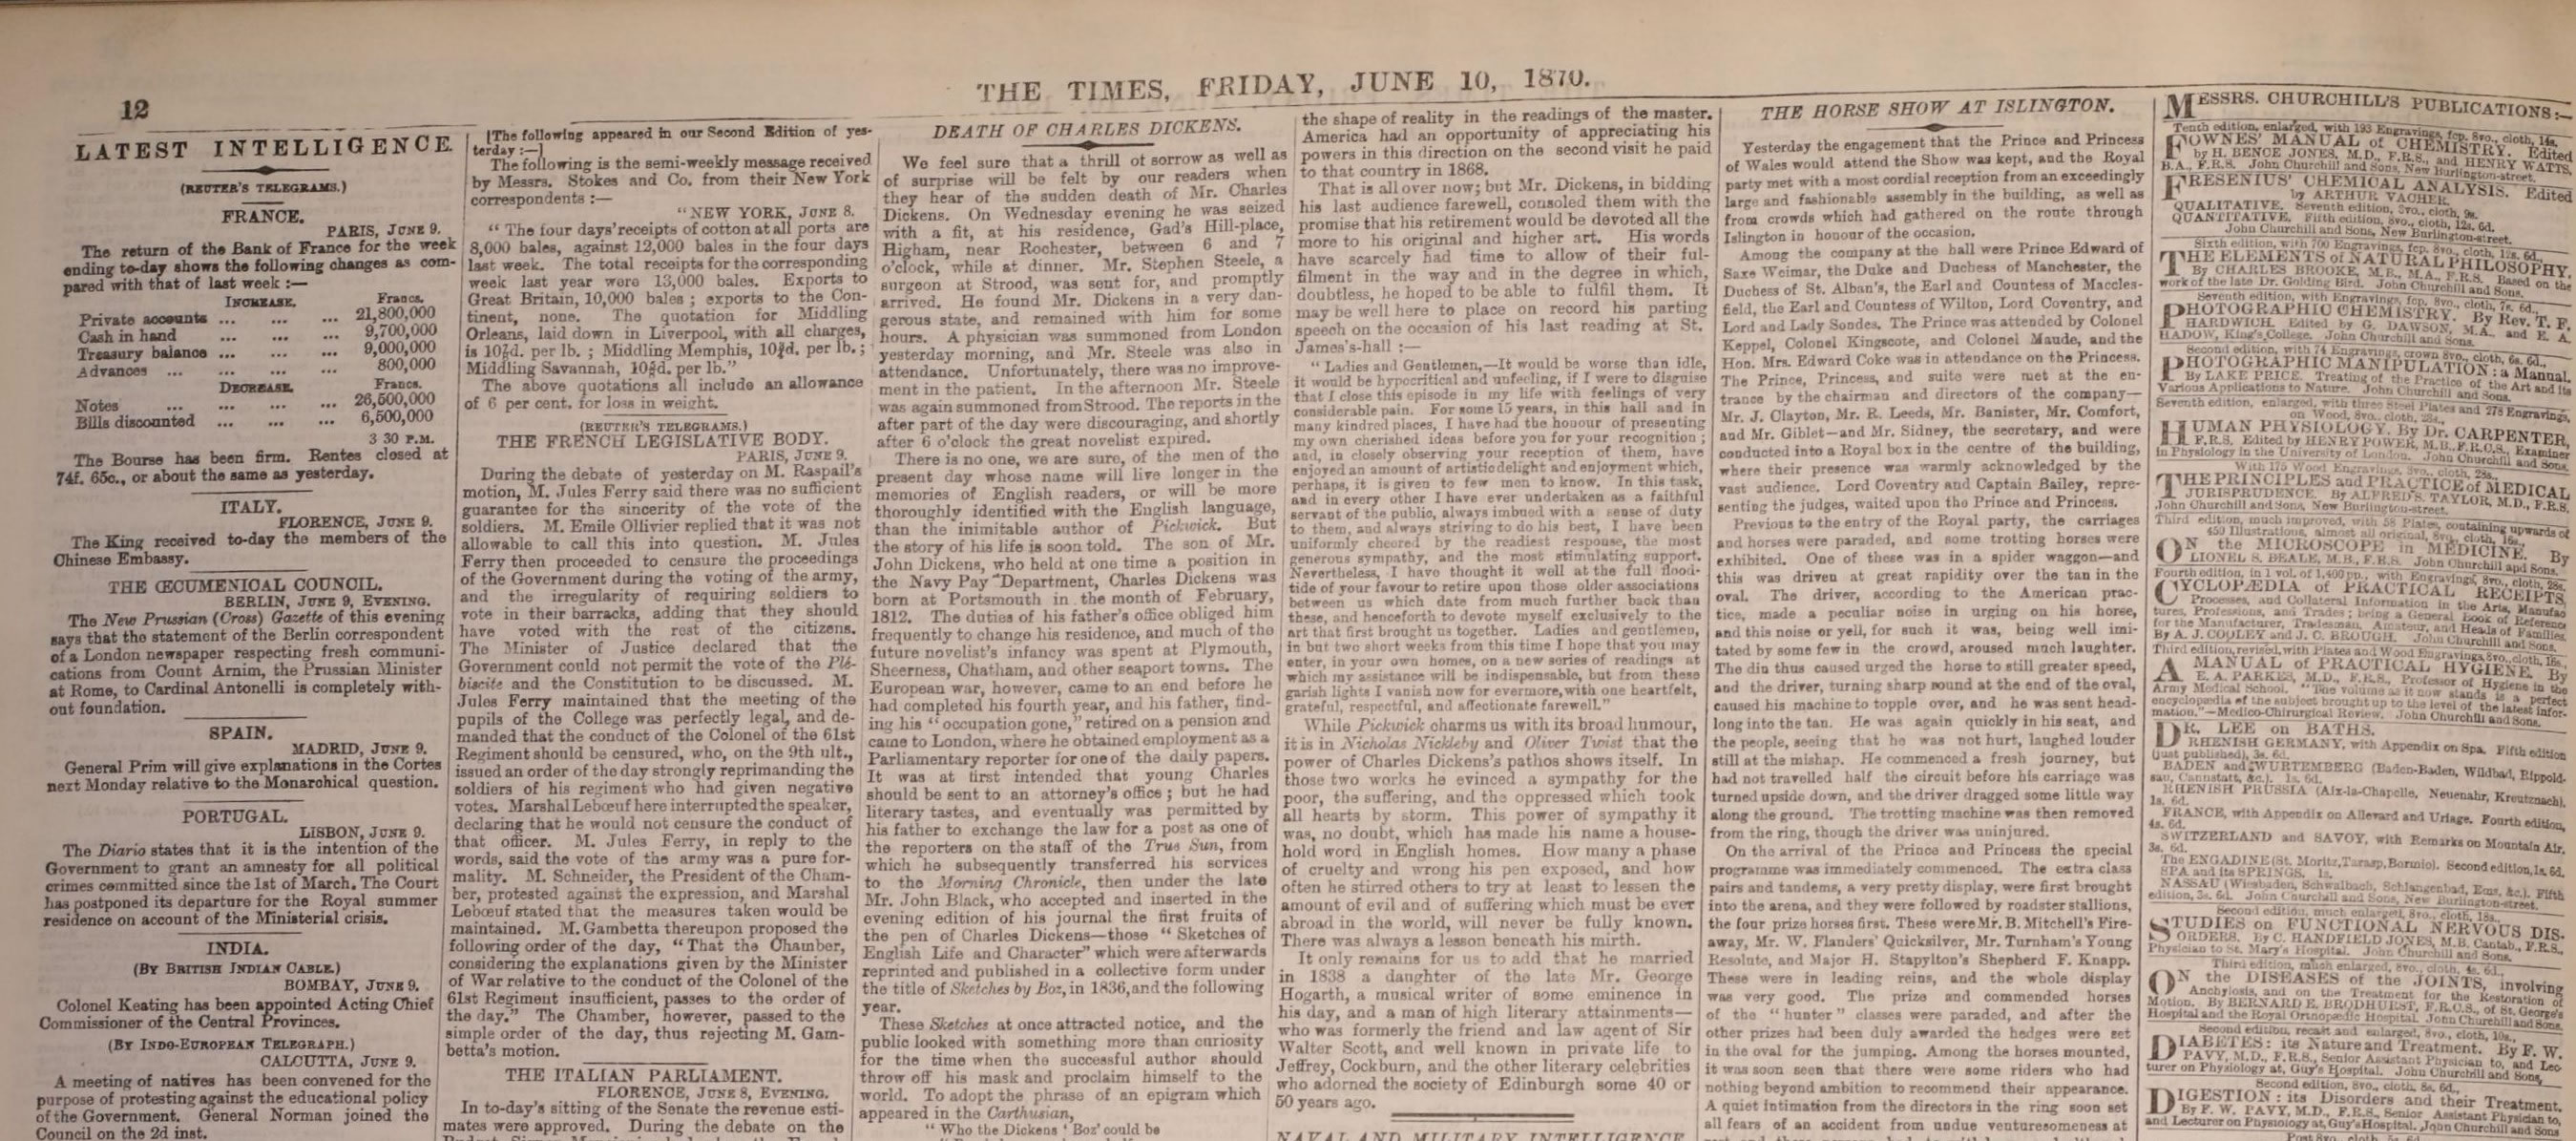 The death of Charles Dickens warranted a look at his life by the Times in June 1870